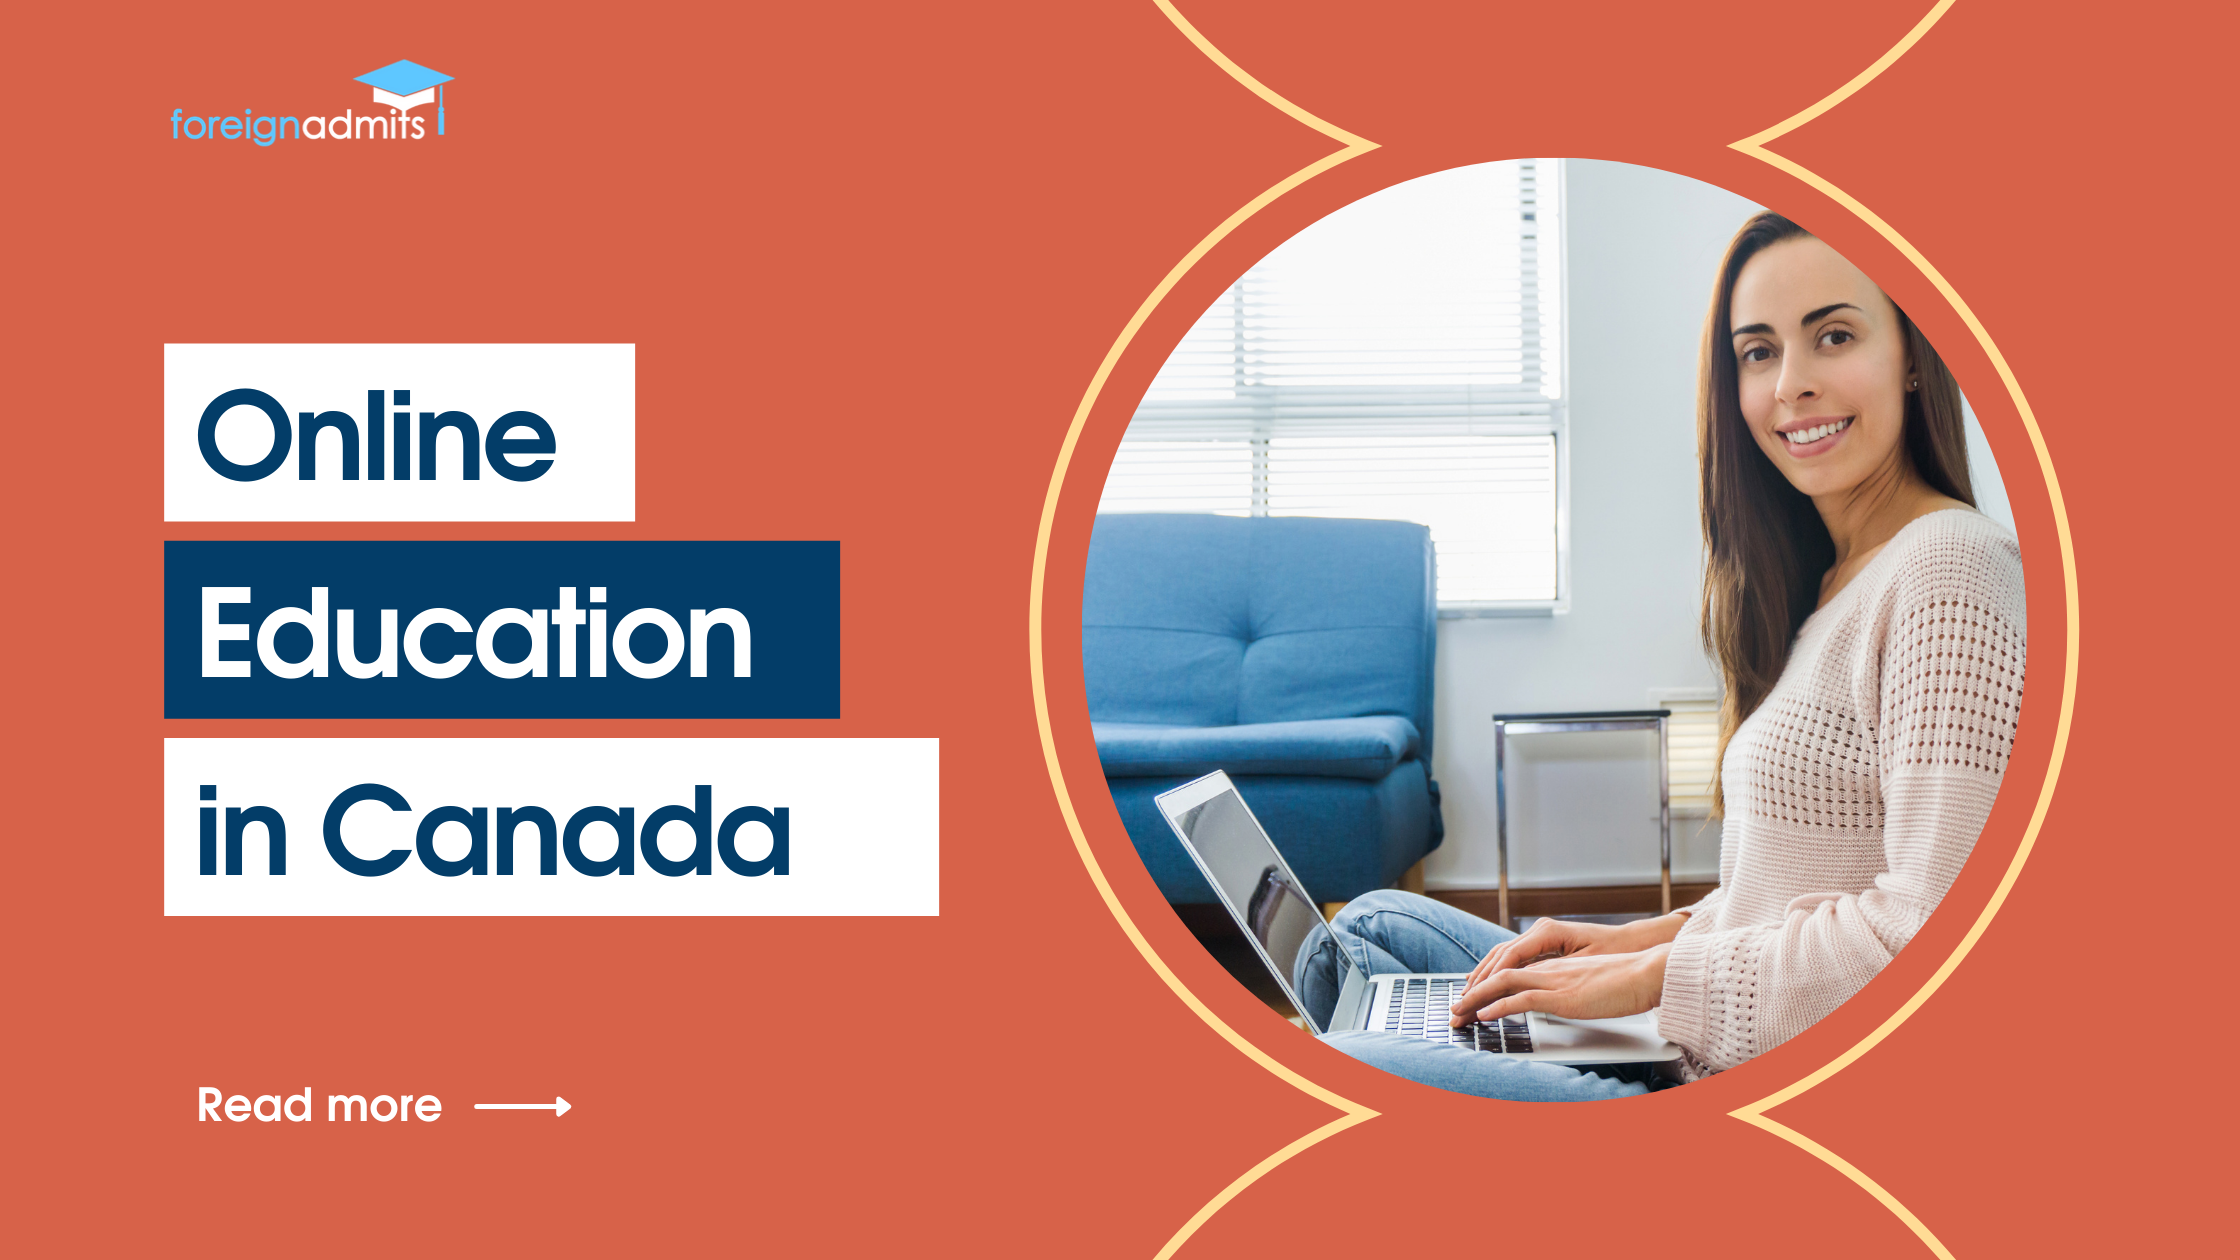 Online education in Canada